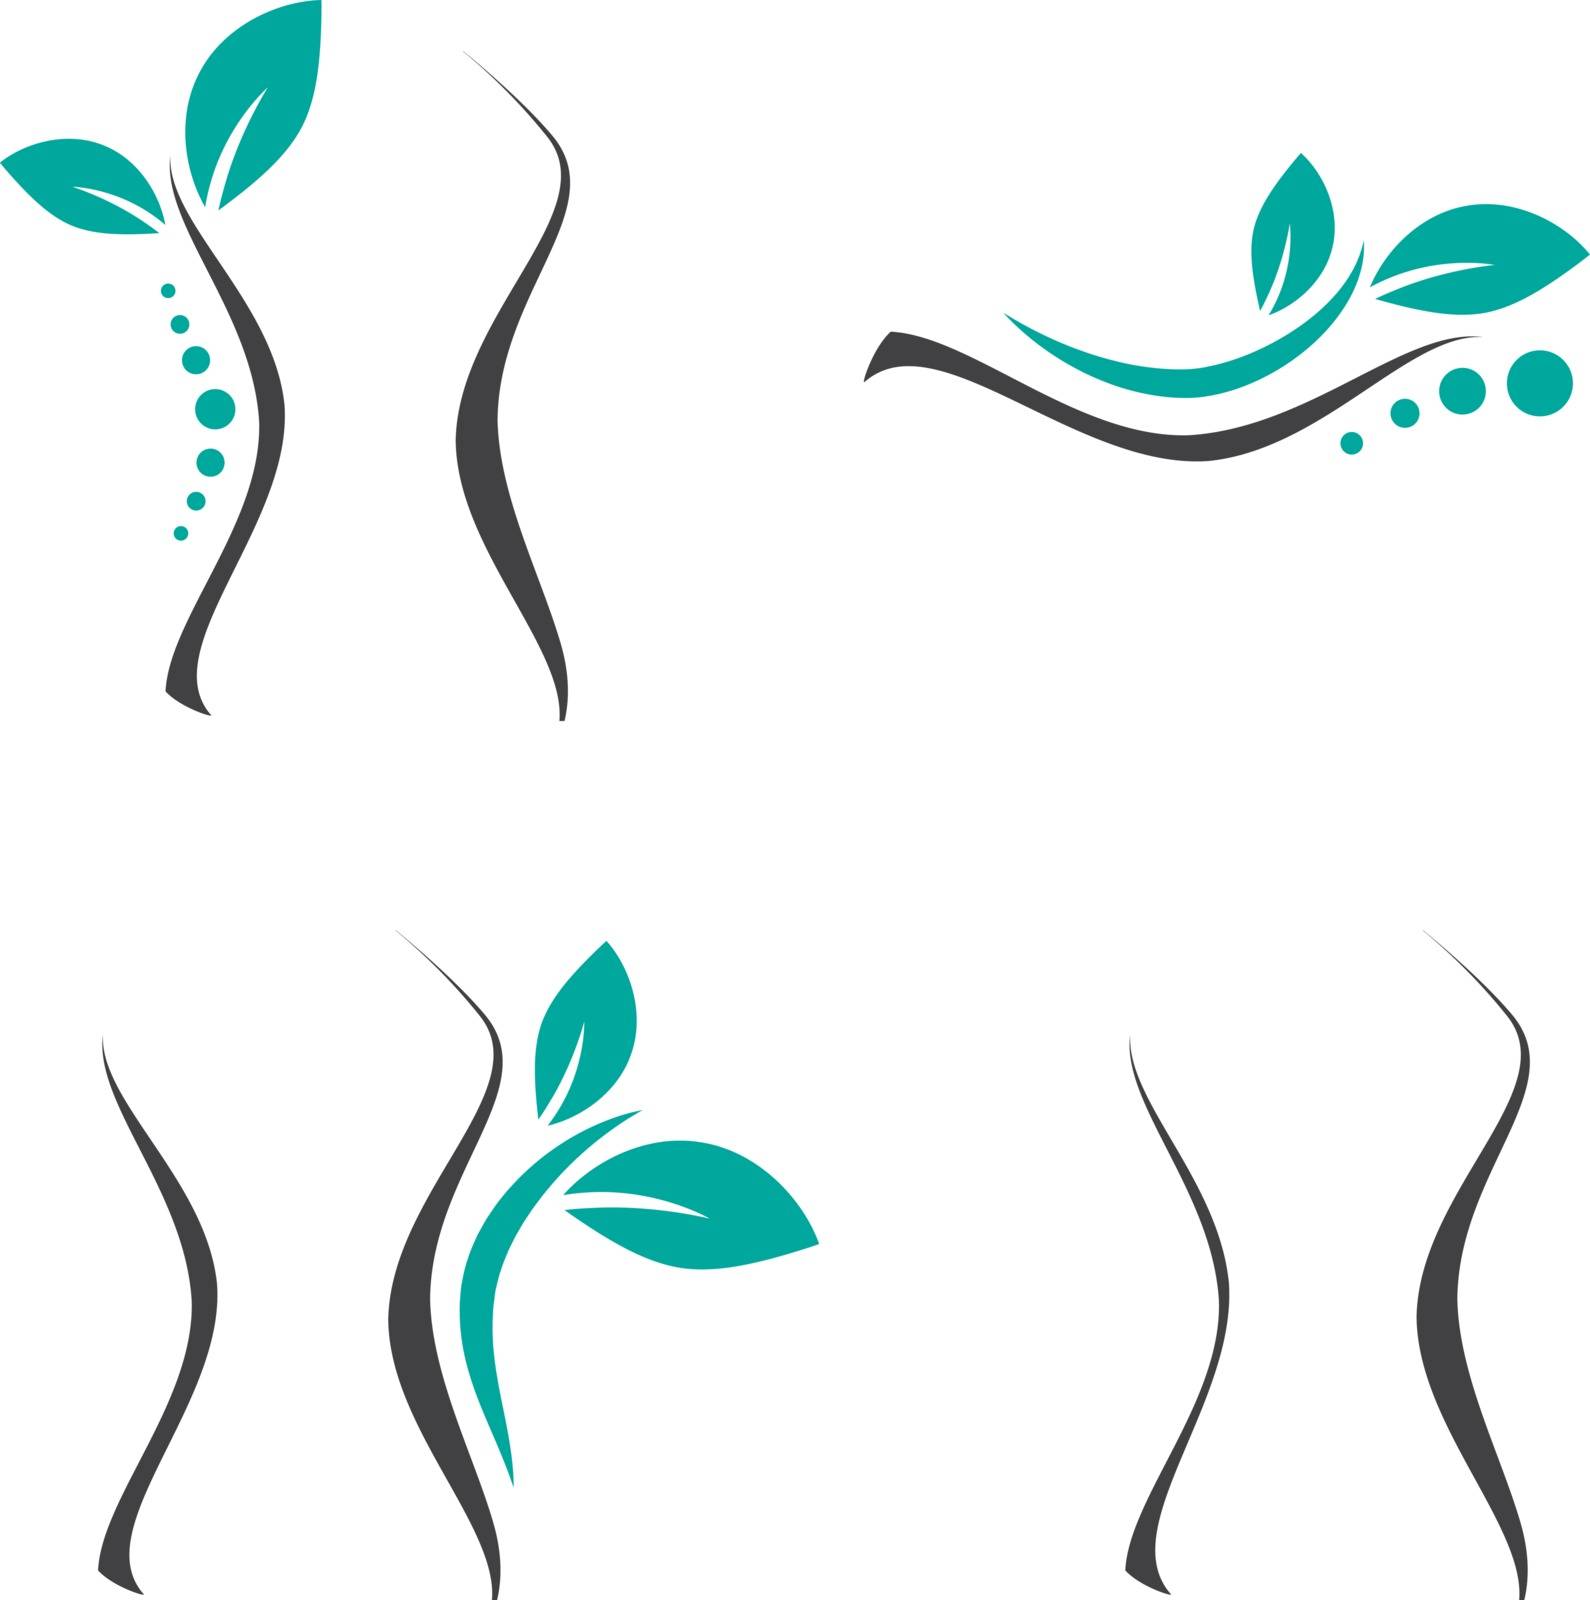 Woman Surgery and Chiropractic Logo Set